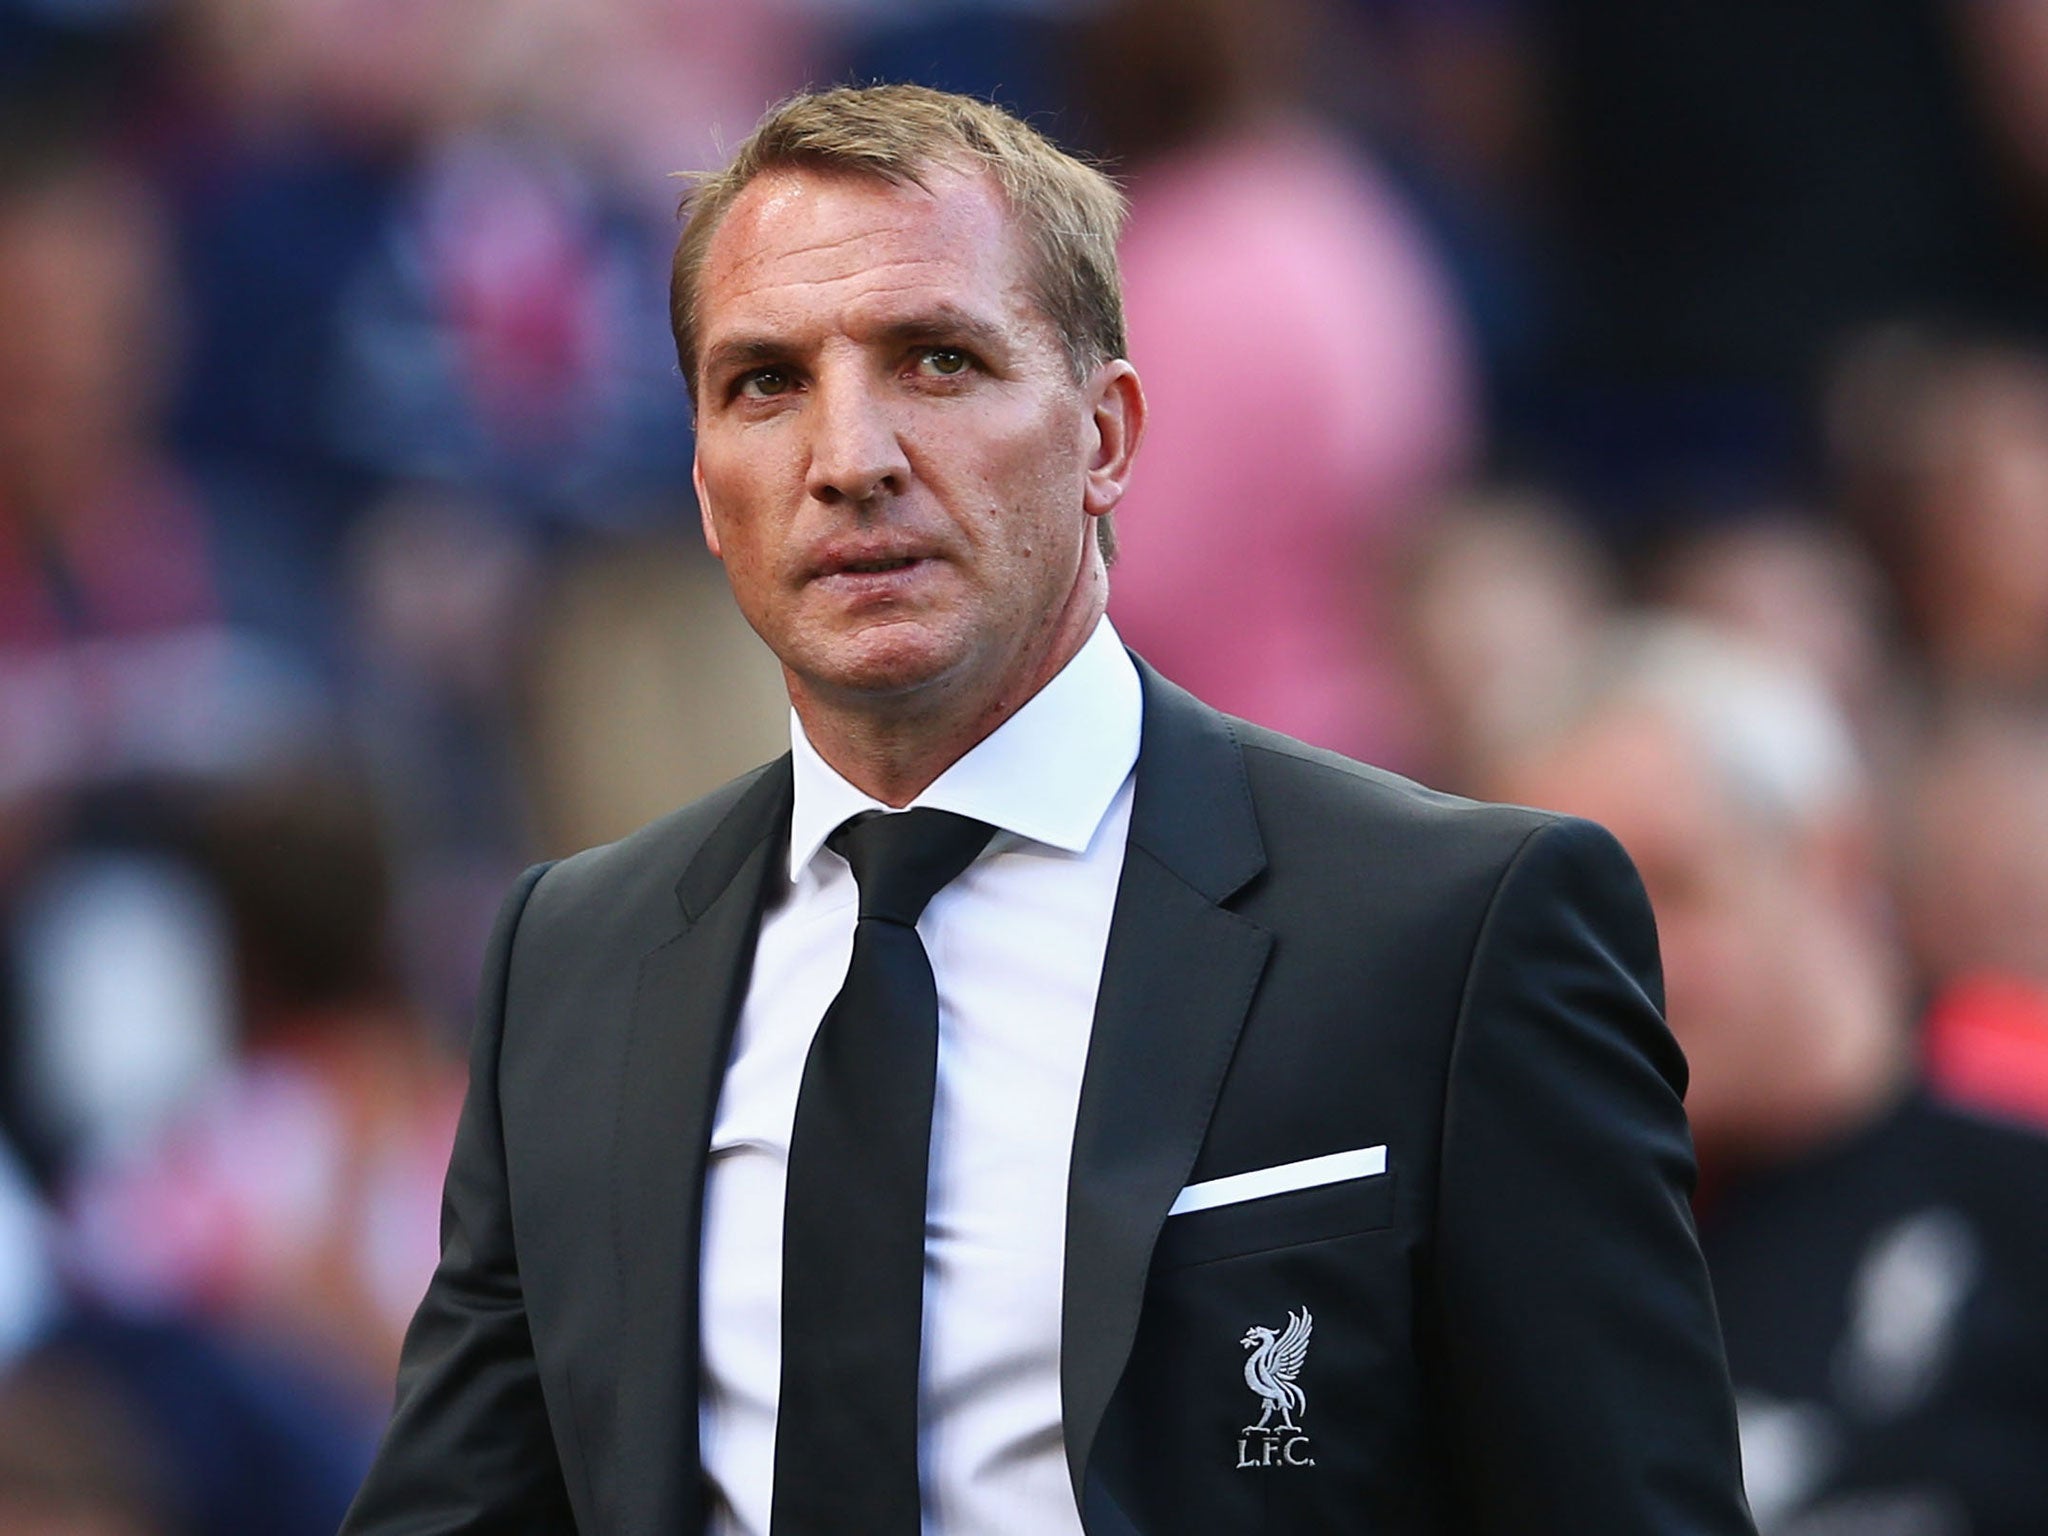 After three years, Brendan Rodgers seems no nearer to finding a reliable pairing at centre-half